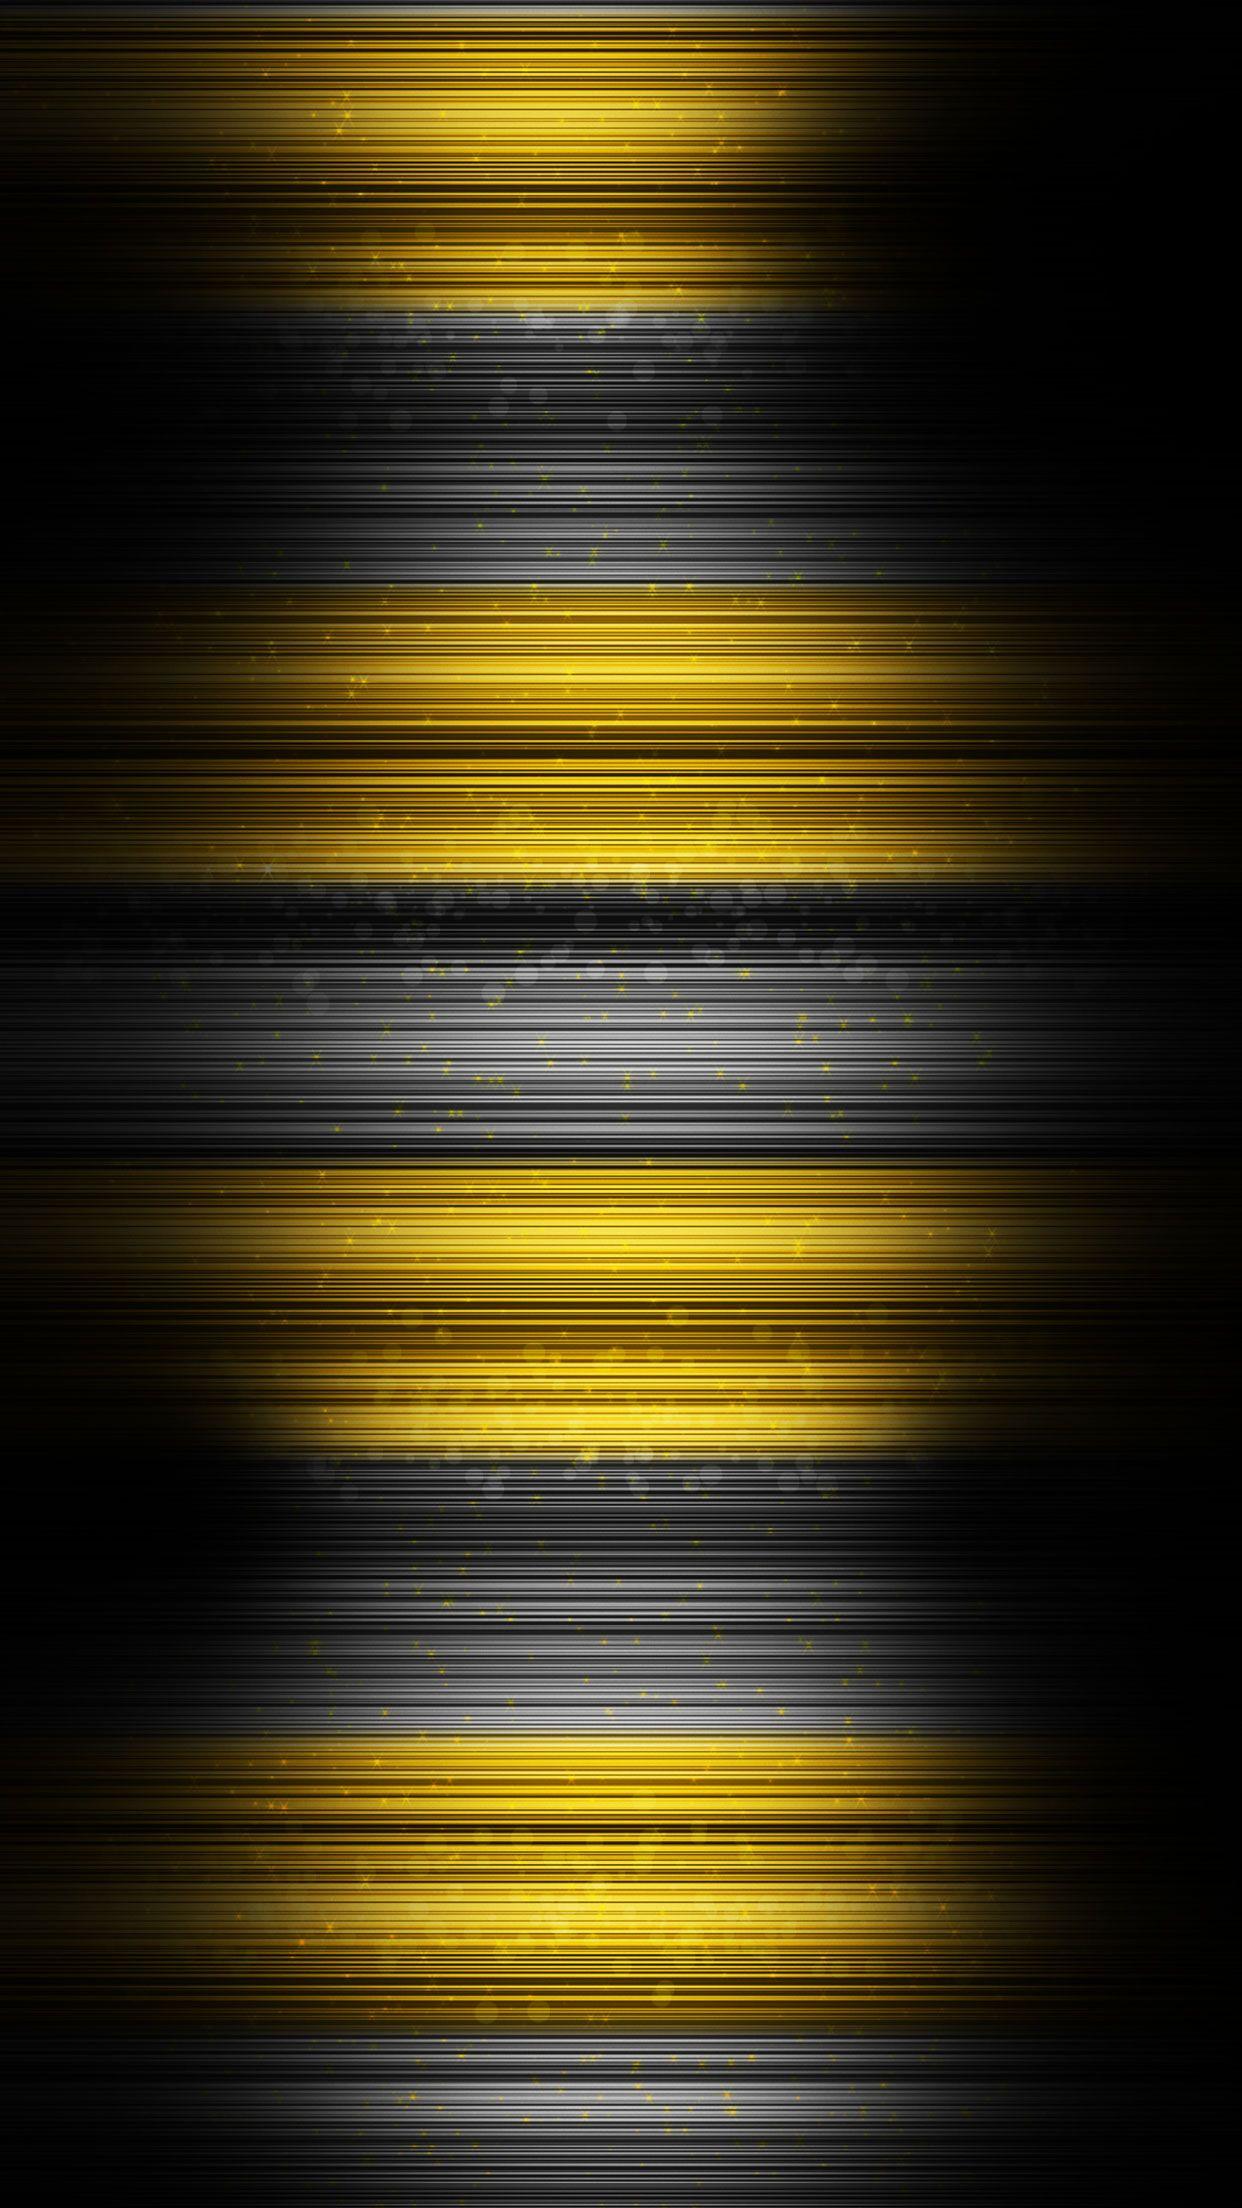 Yellow and black abstract wallpaper for #iPhone and #Android